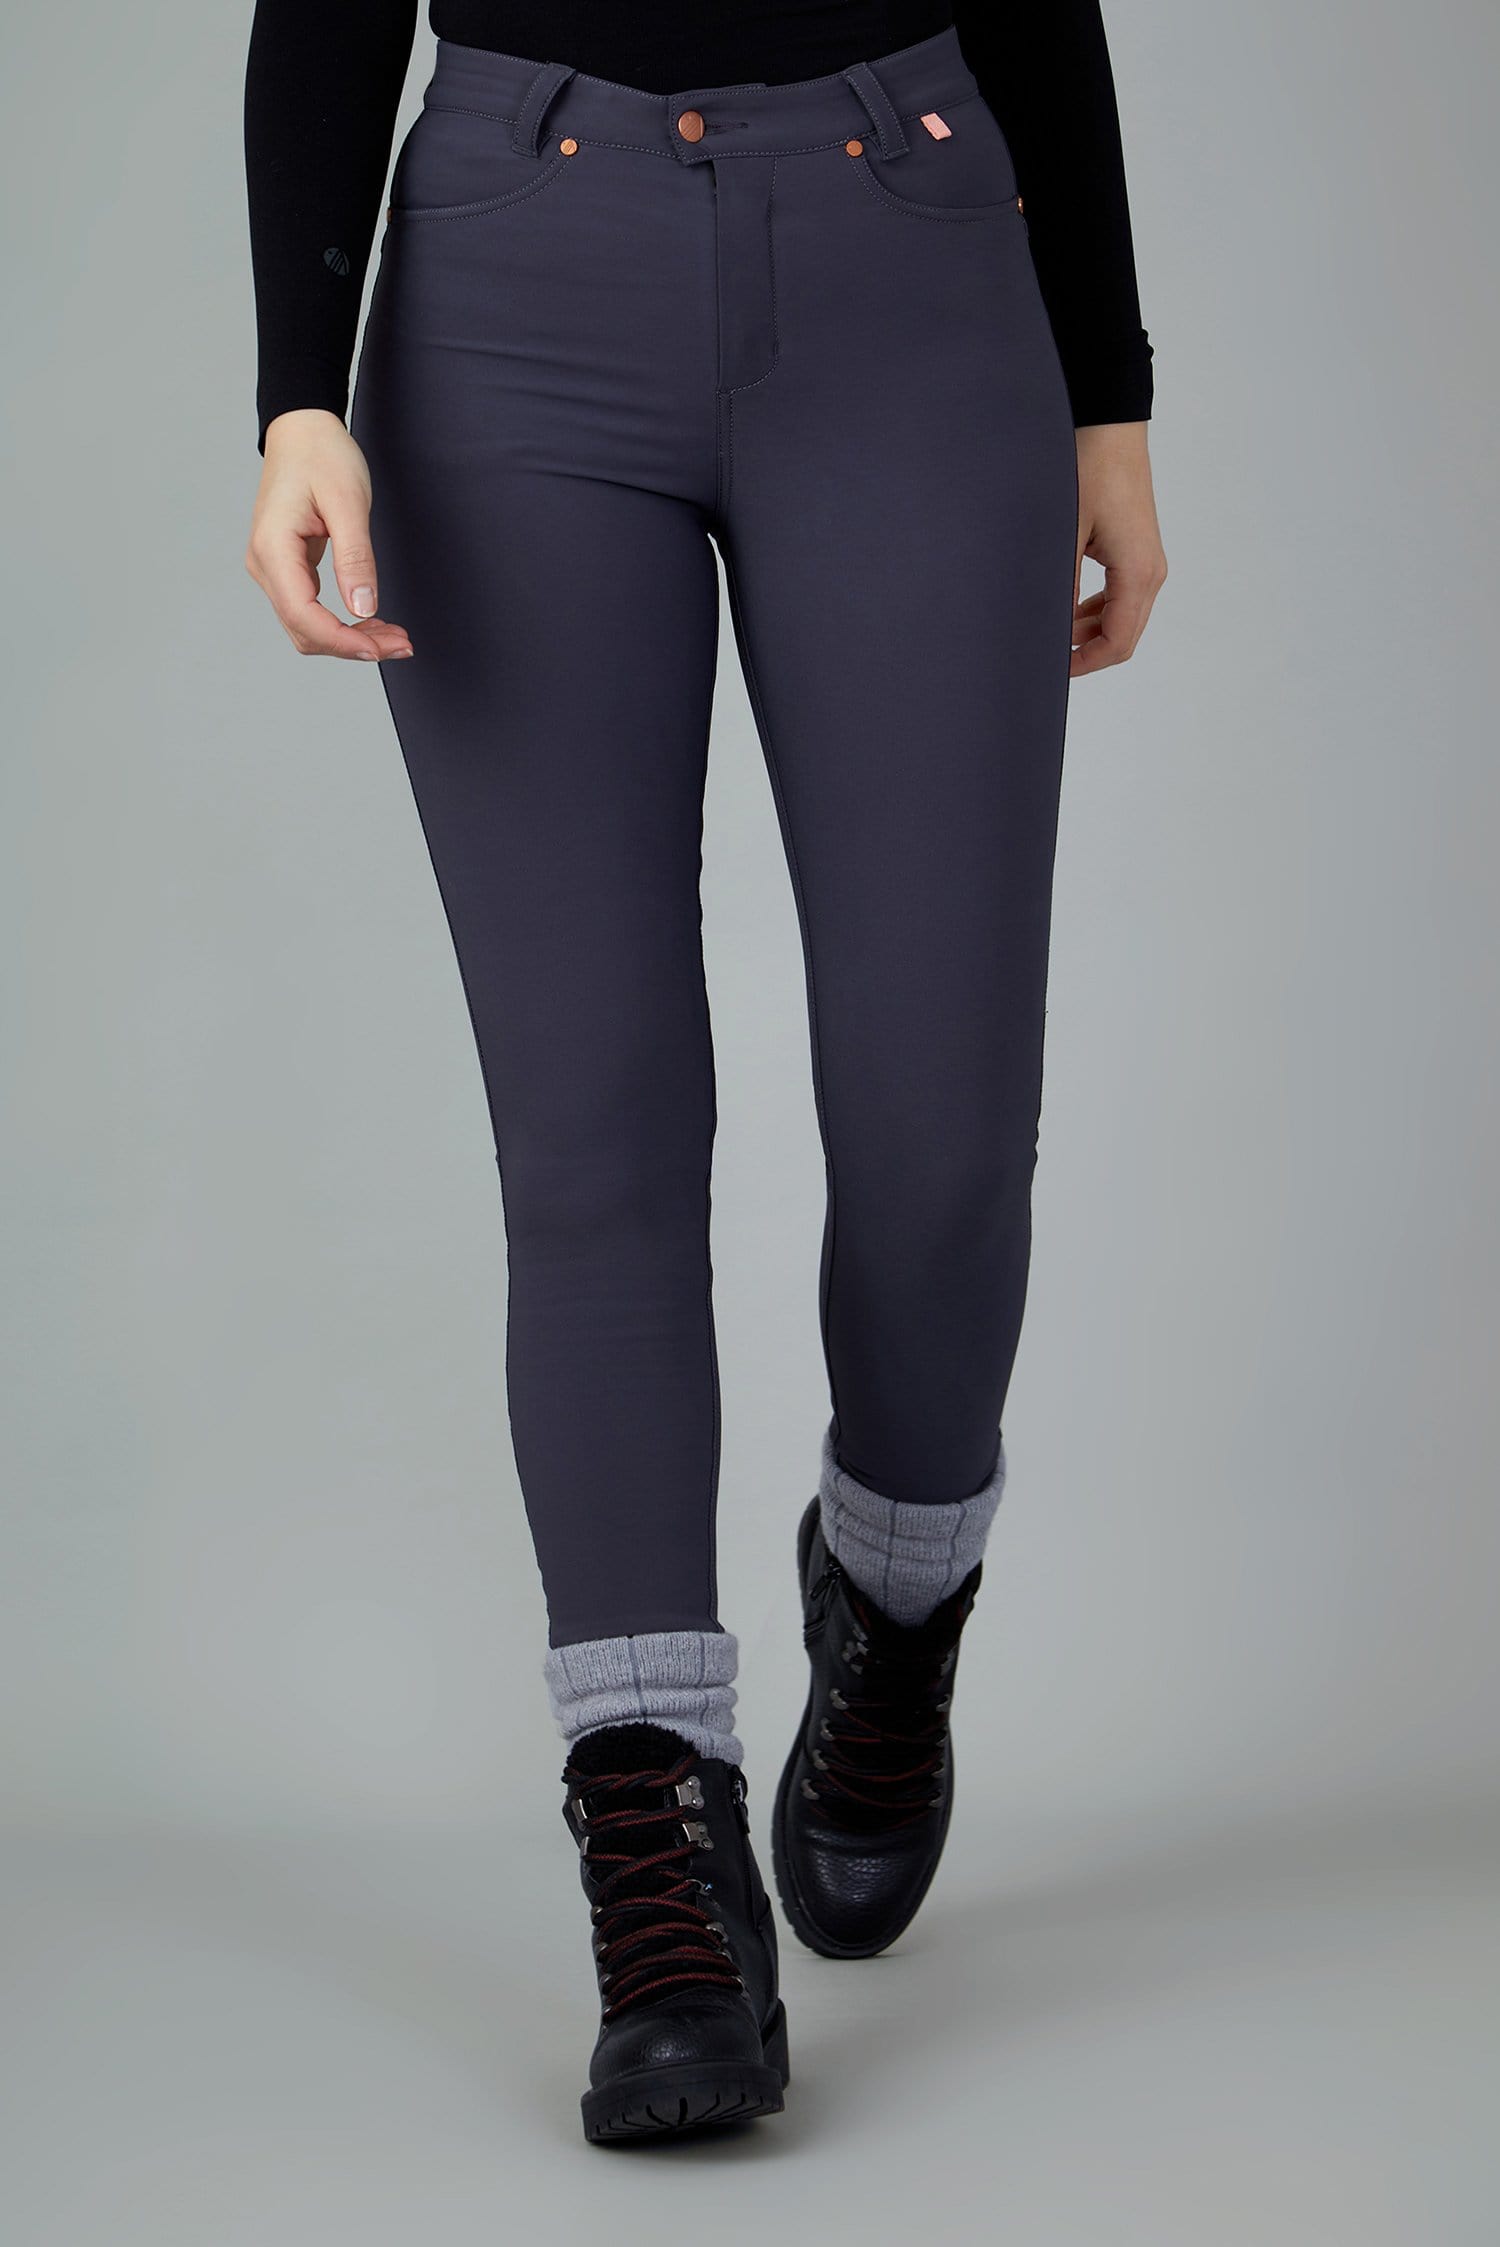 The Aventurite Stretch Skinny Outdoor Trousers - Obsidian - 28xl / Uk10 - Womens - Acai Outdoorwear